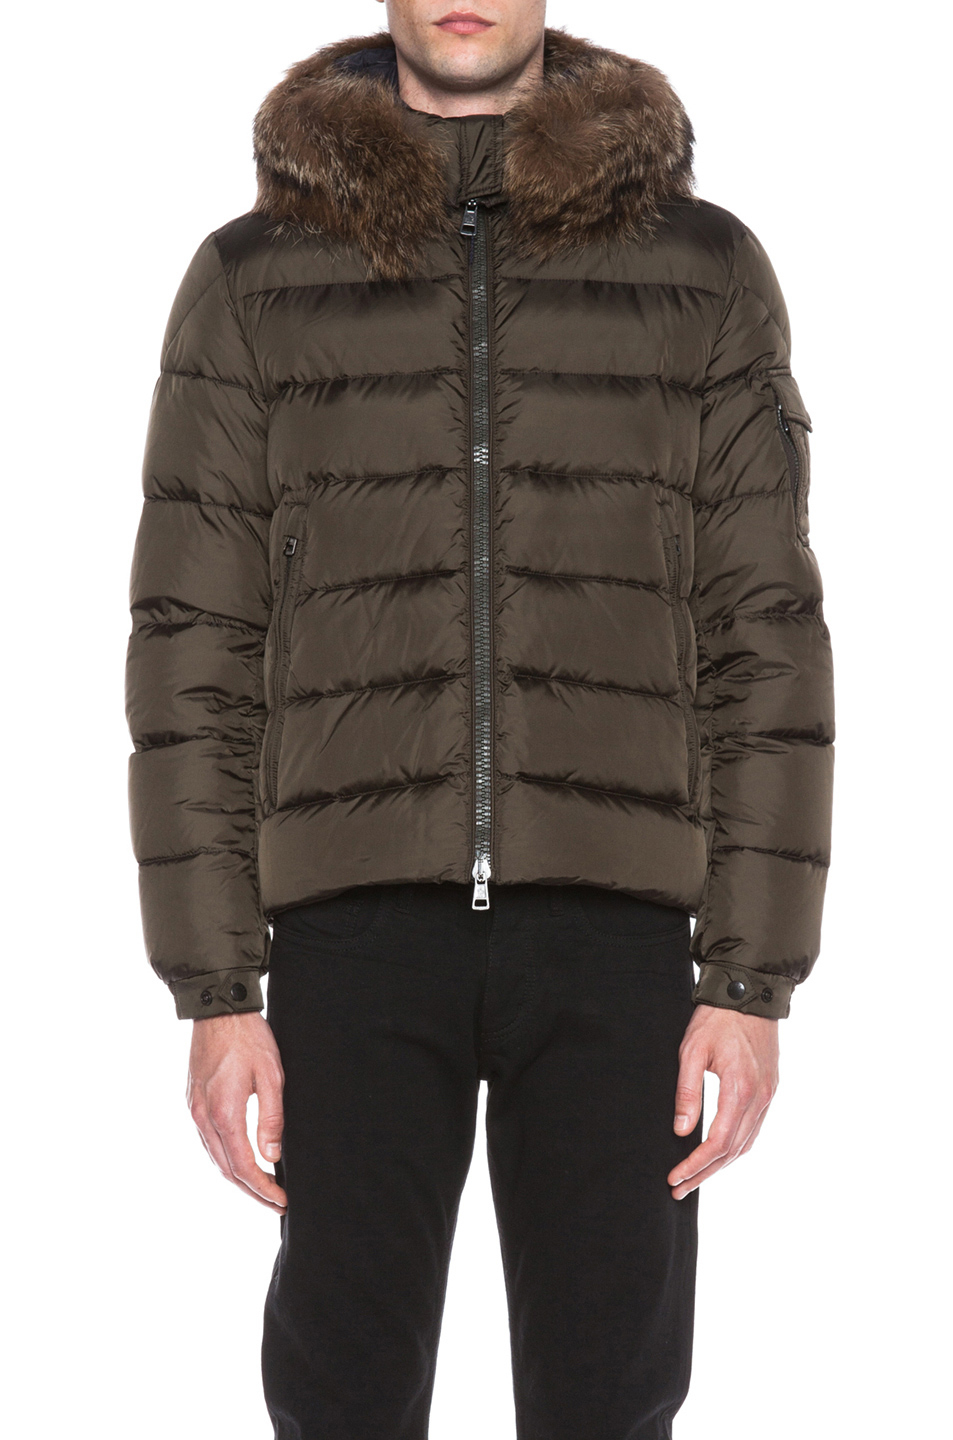 Moncler Byron Jacket with Fur Hood in 